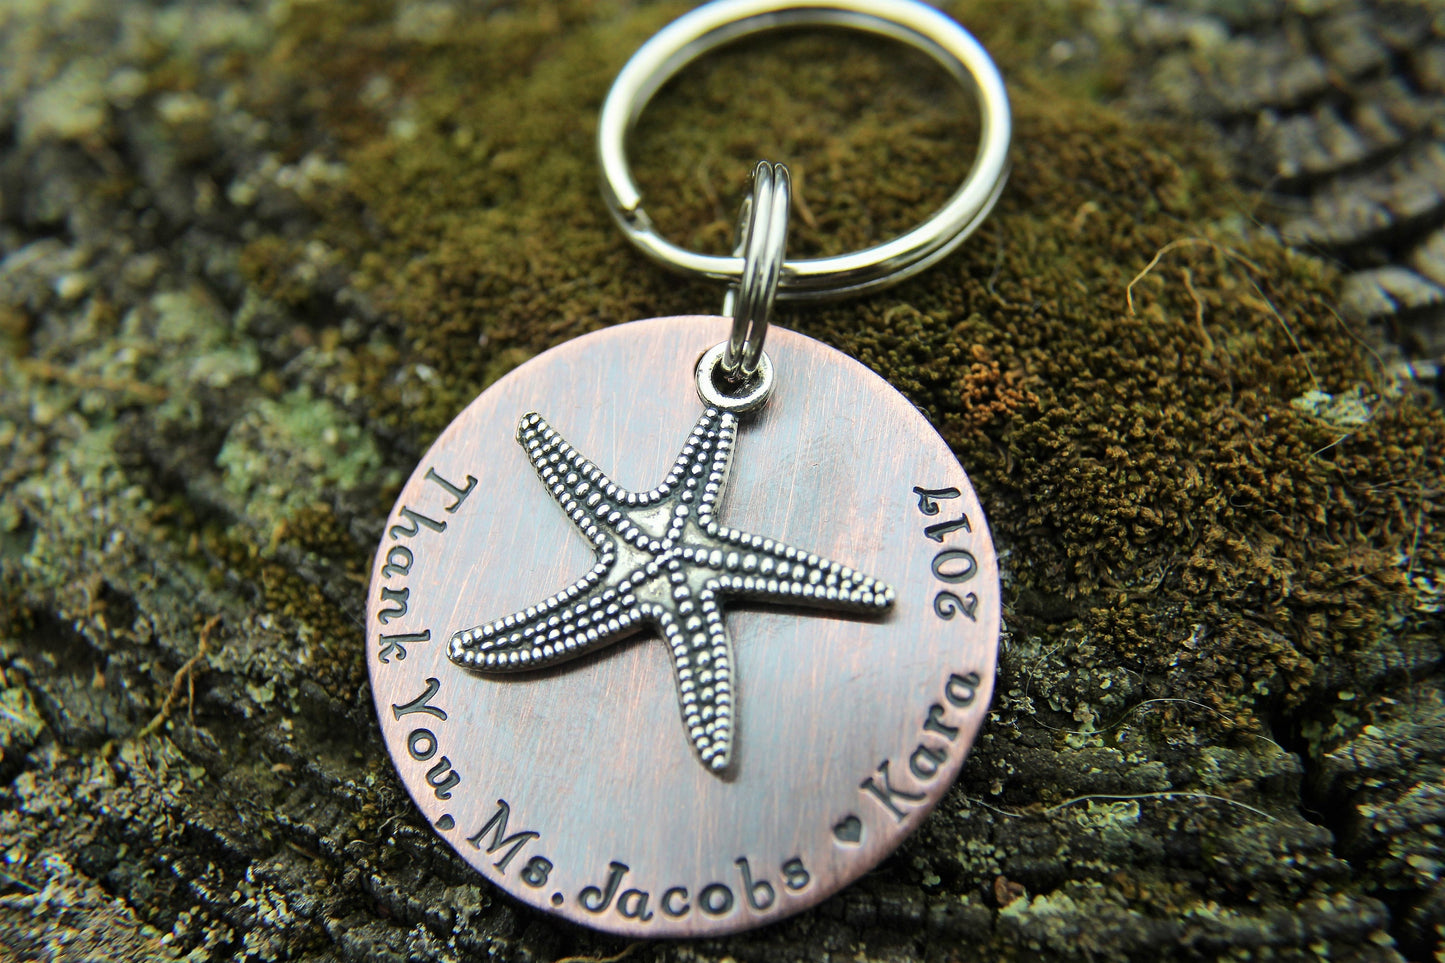 Christms Teacher Gift-Make a Difference Keychain-Gift for Teacher-Starfish Thrower-Starfish-Thank You Gift for Teacher